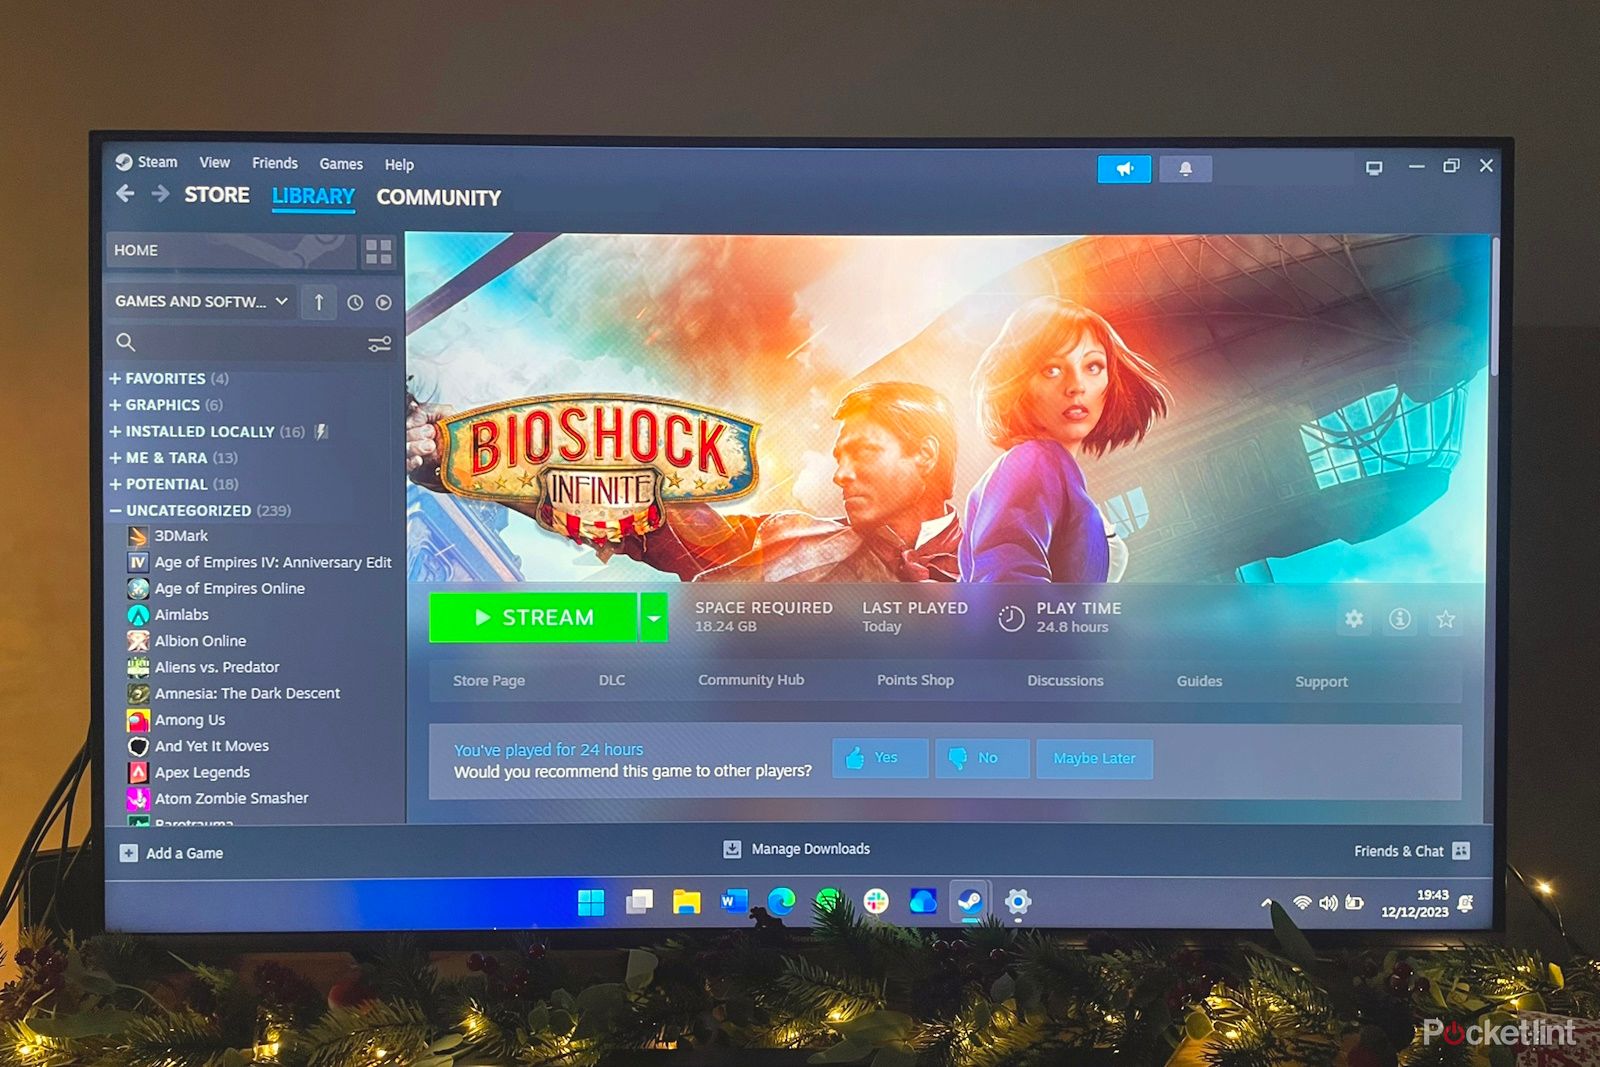 Steam Link streaming button displayed on Hisense TV